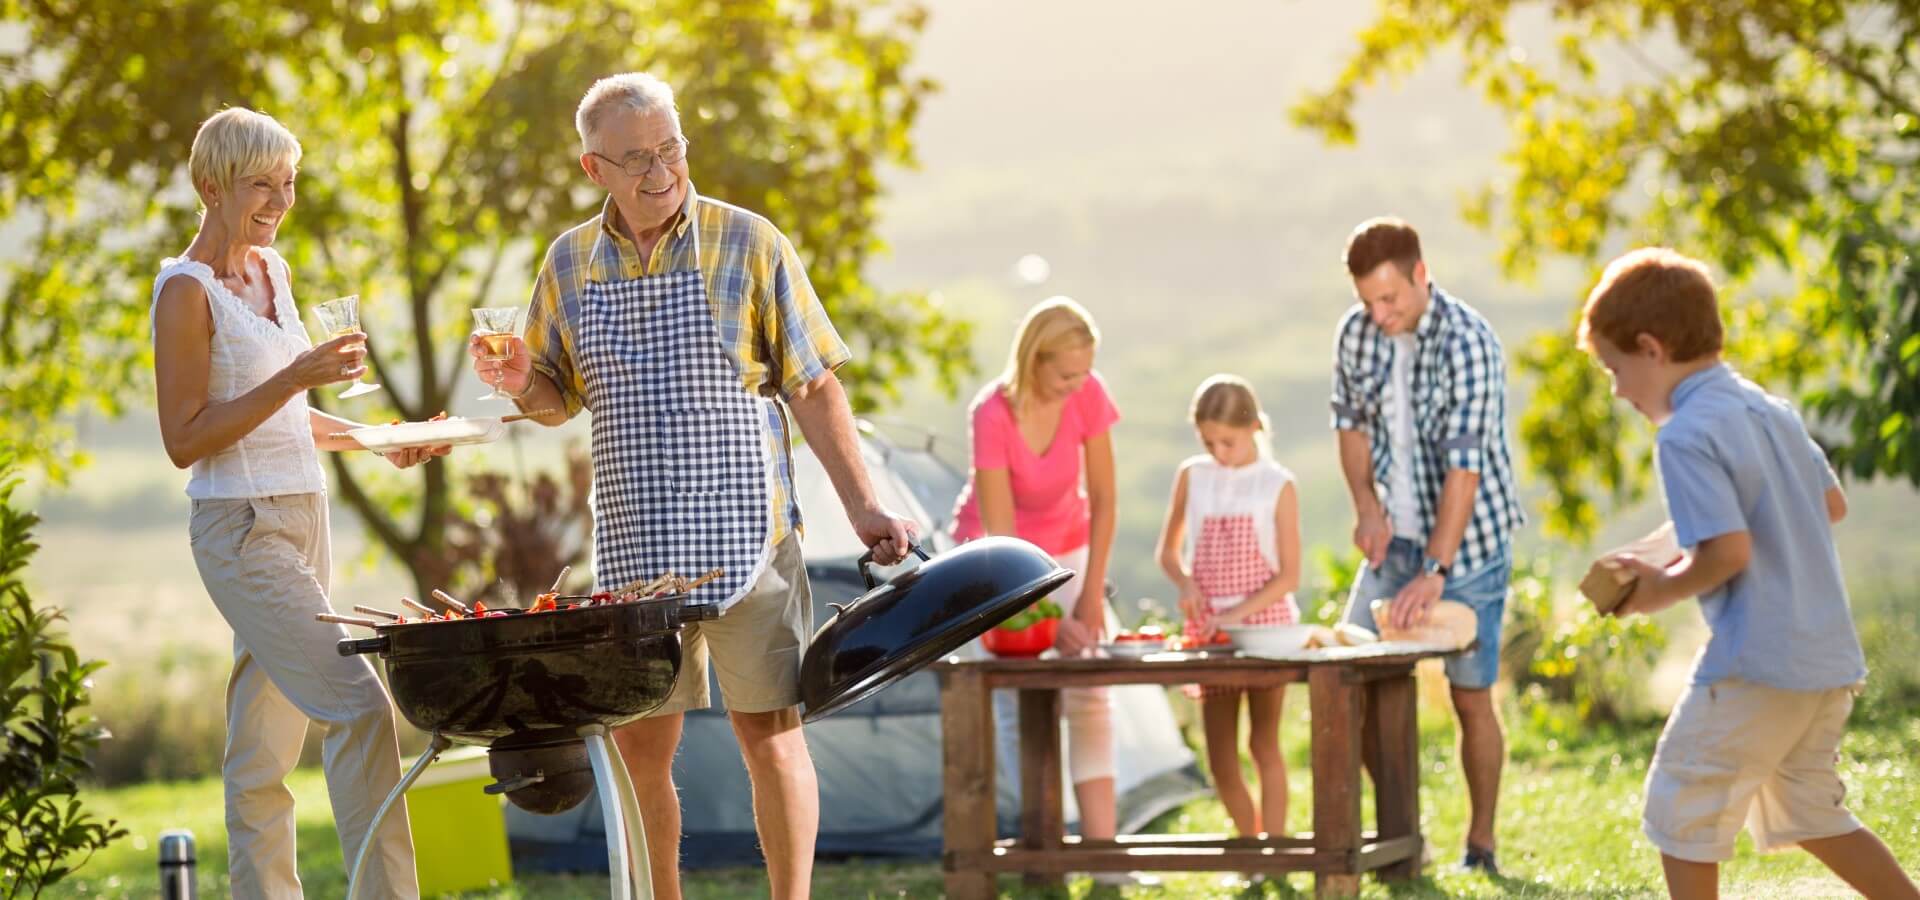 A three generation family enjoying a barbeque outdoors in a beautiful location